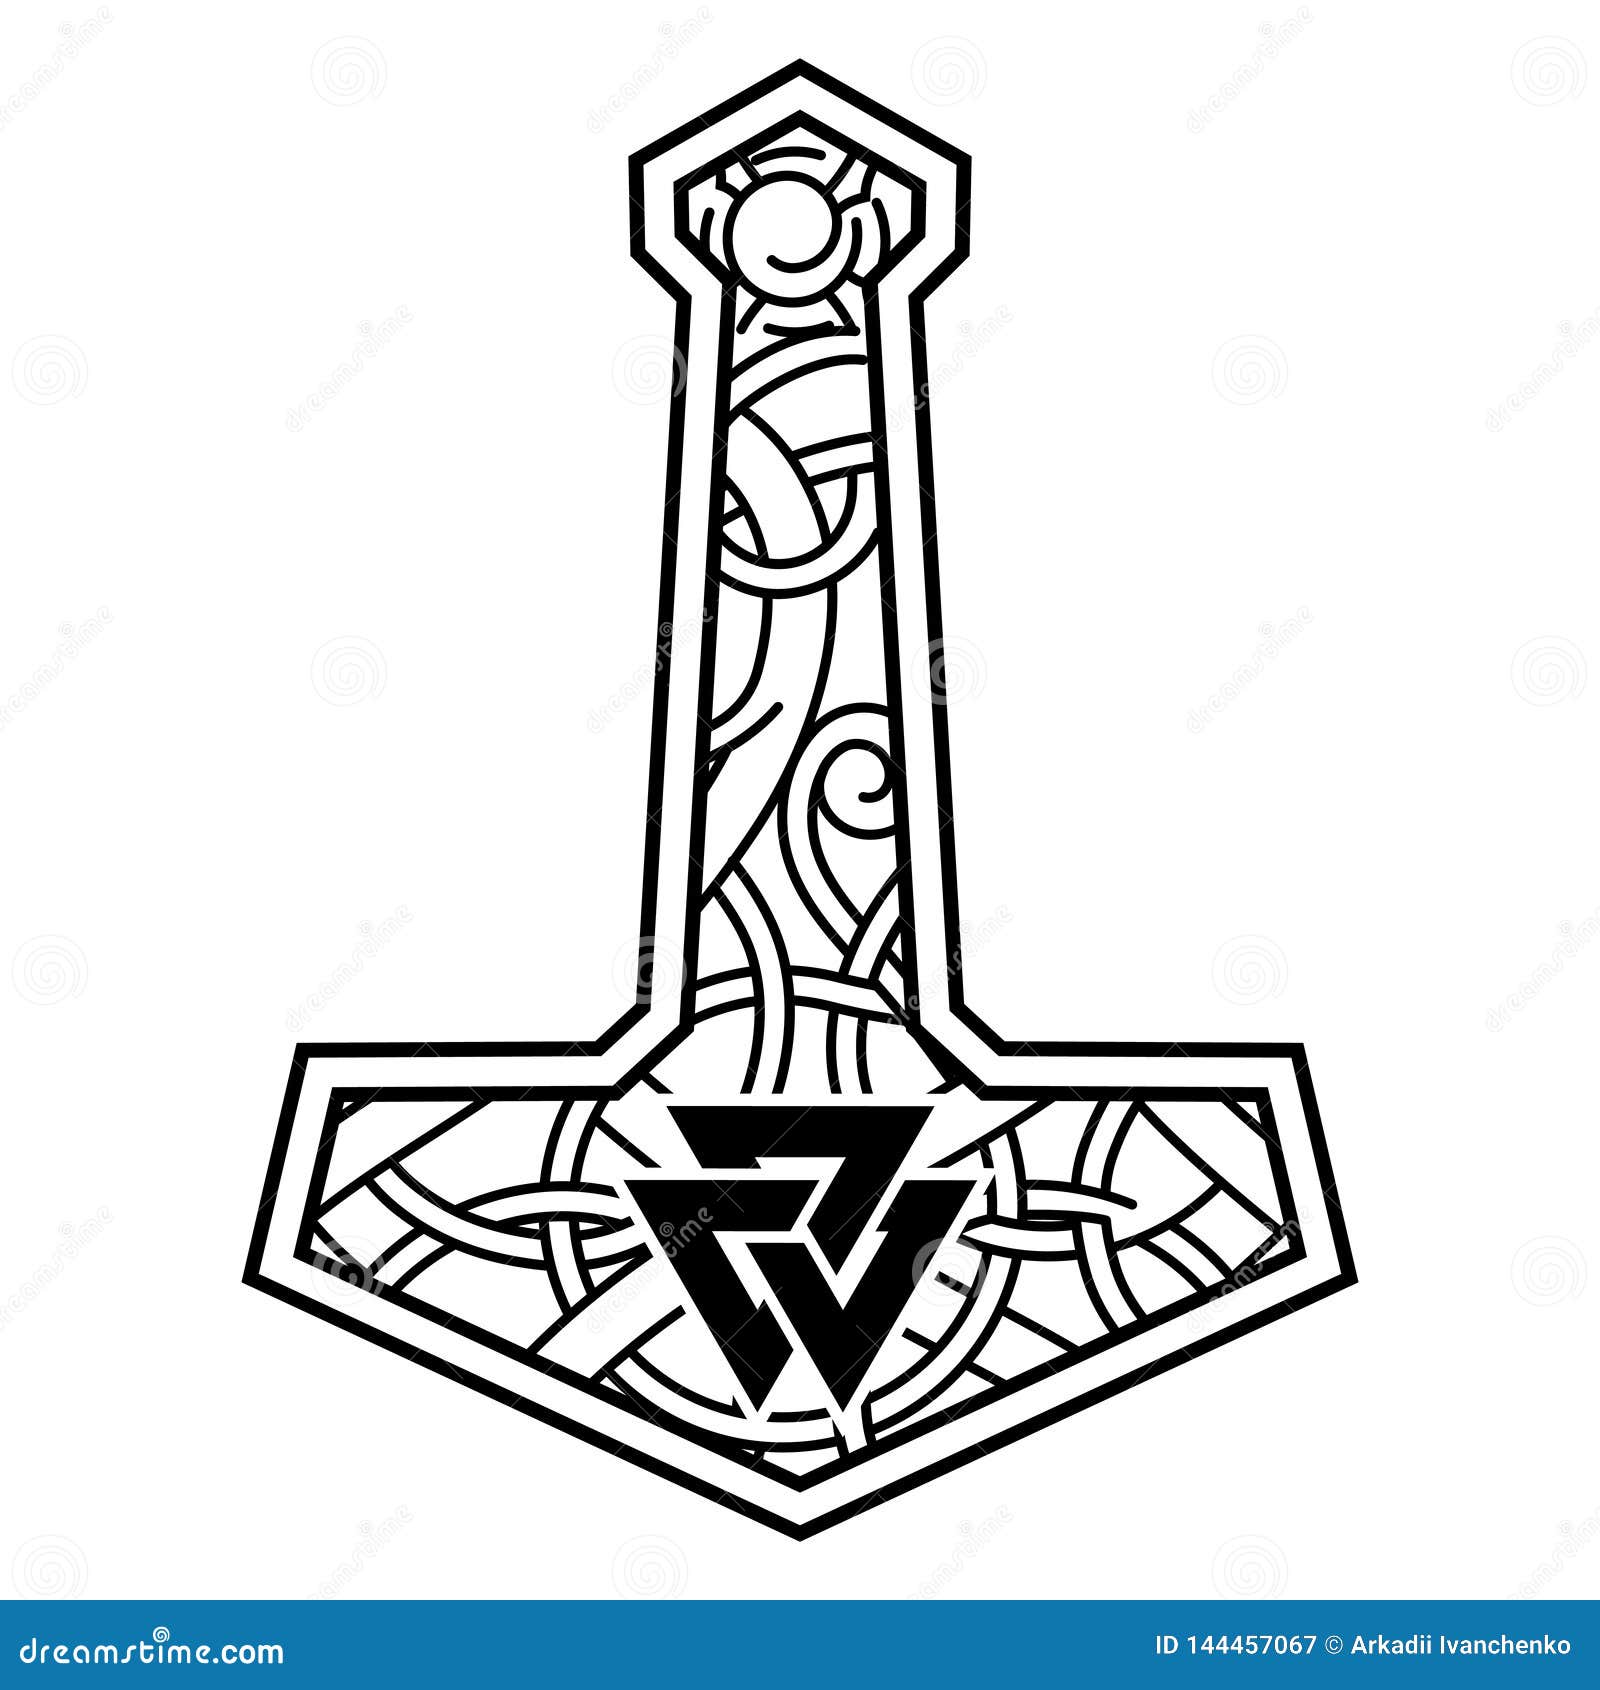 Thor's Hammer Completed by lilmay2 on DeviantArt